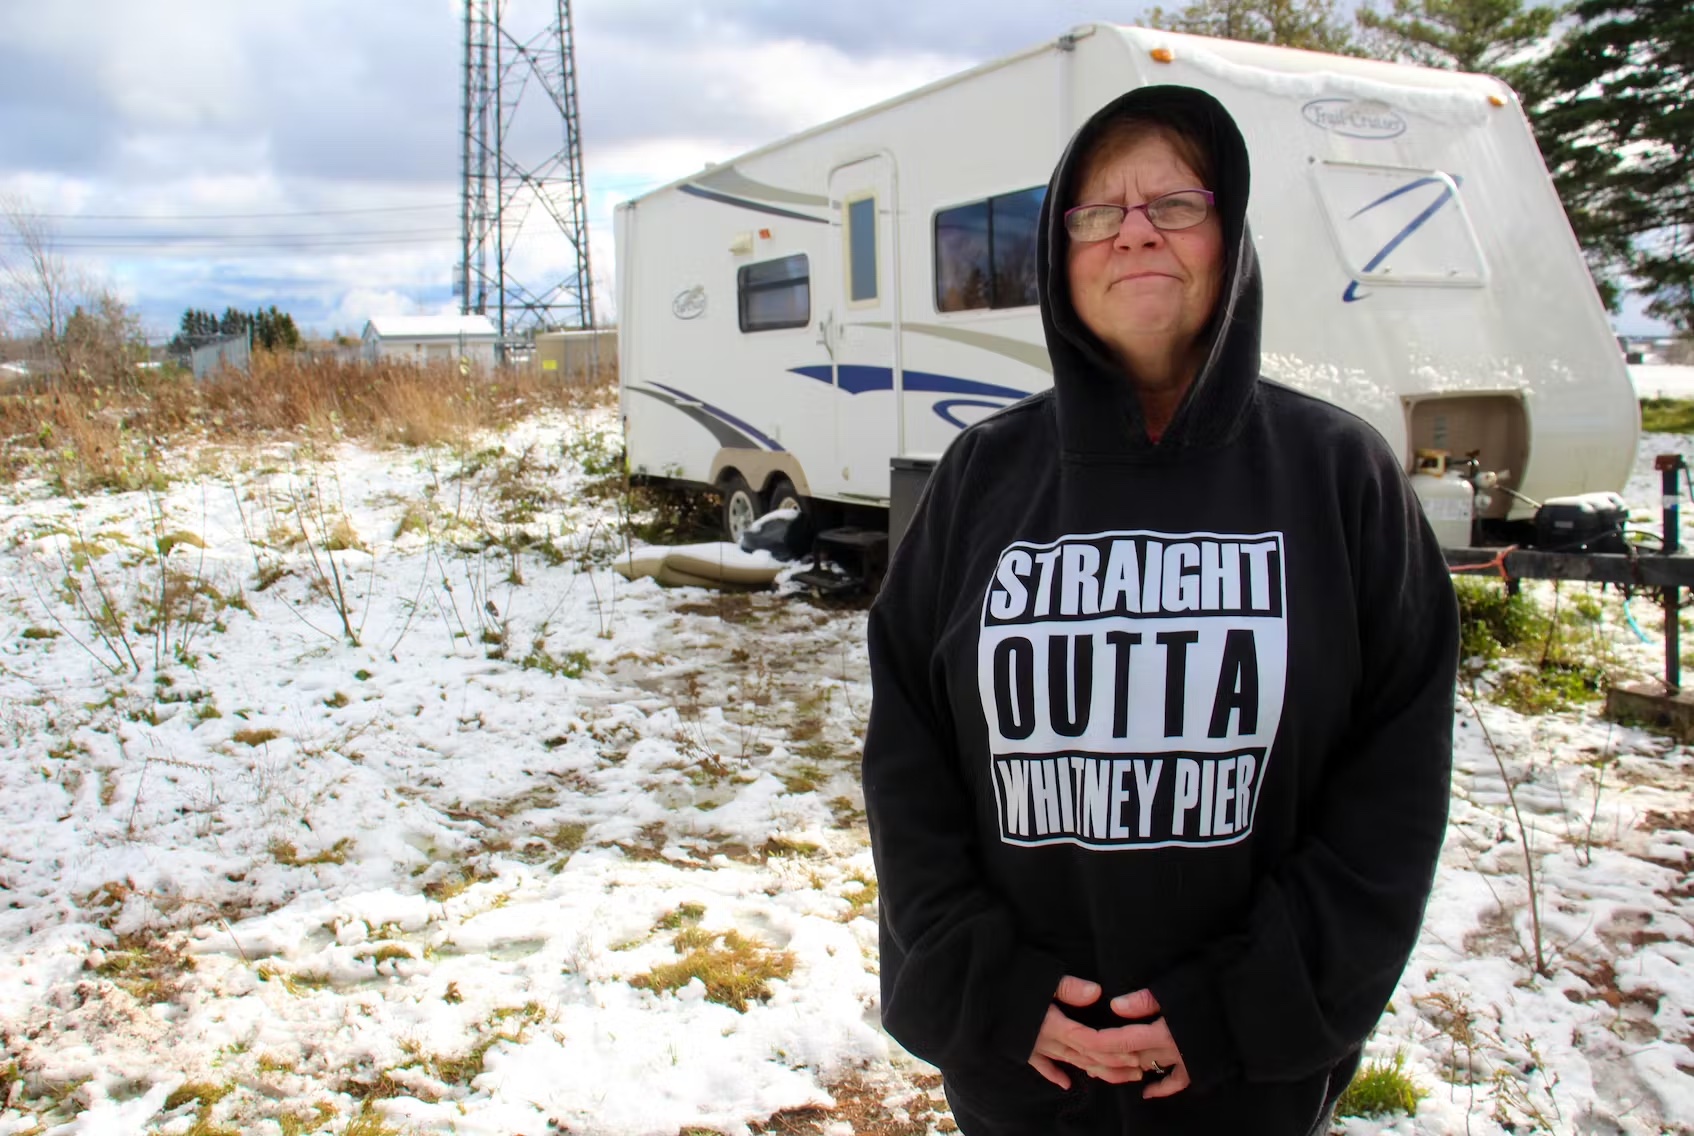 Shannon Dornadic stands outside the recreational vehicle she moved into in August, unable to find affordable housing appropriate to her needs. (Nicole Sullivan / Cape Breton Post)